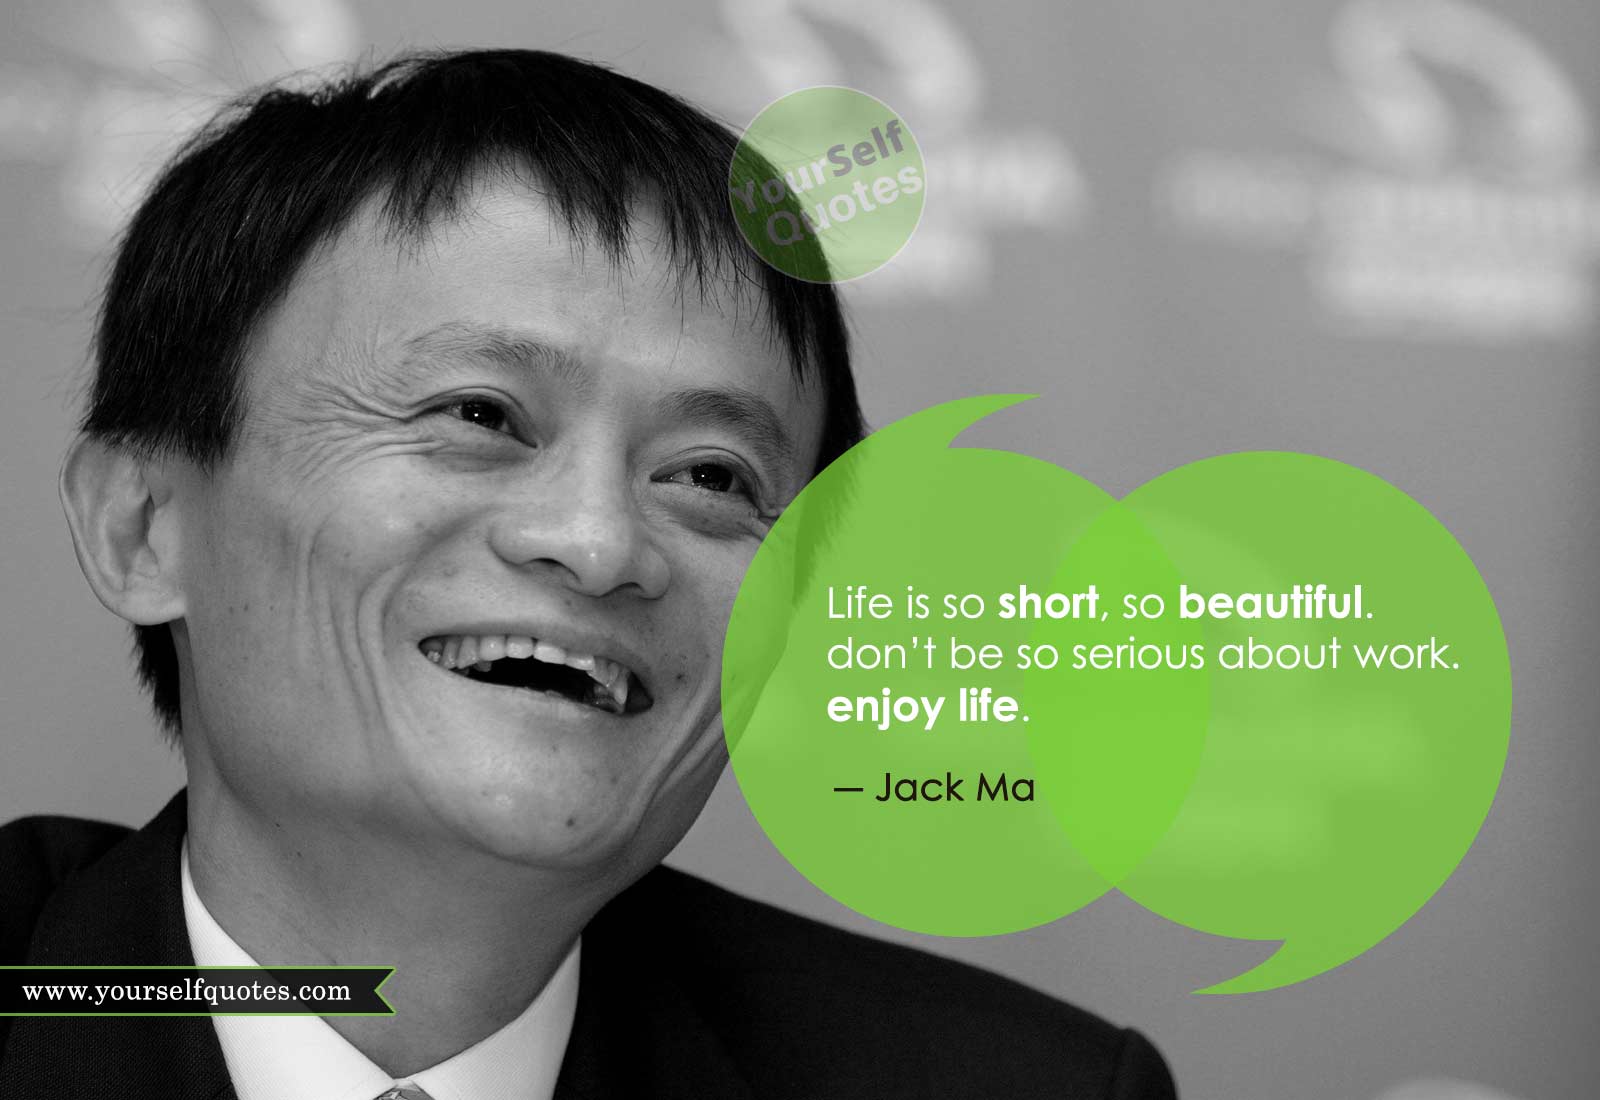 Jack Ma Quotes on Life